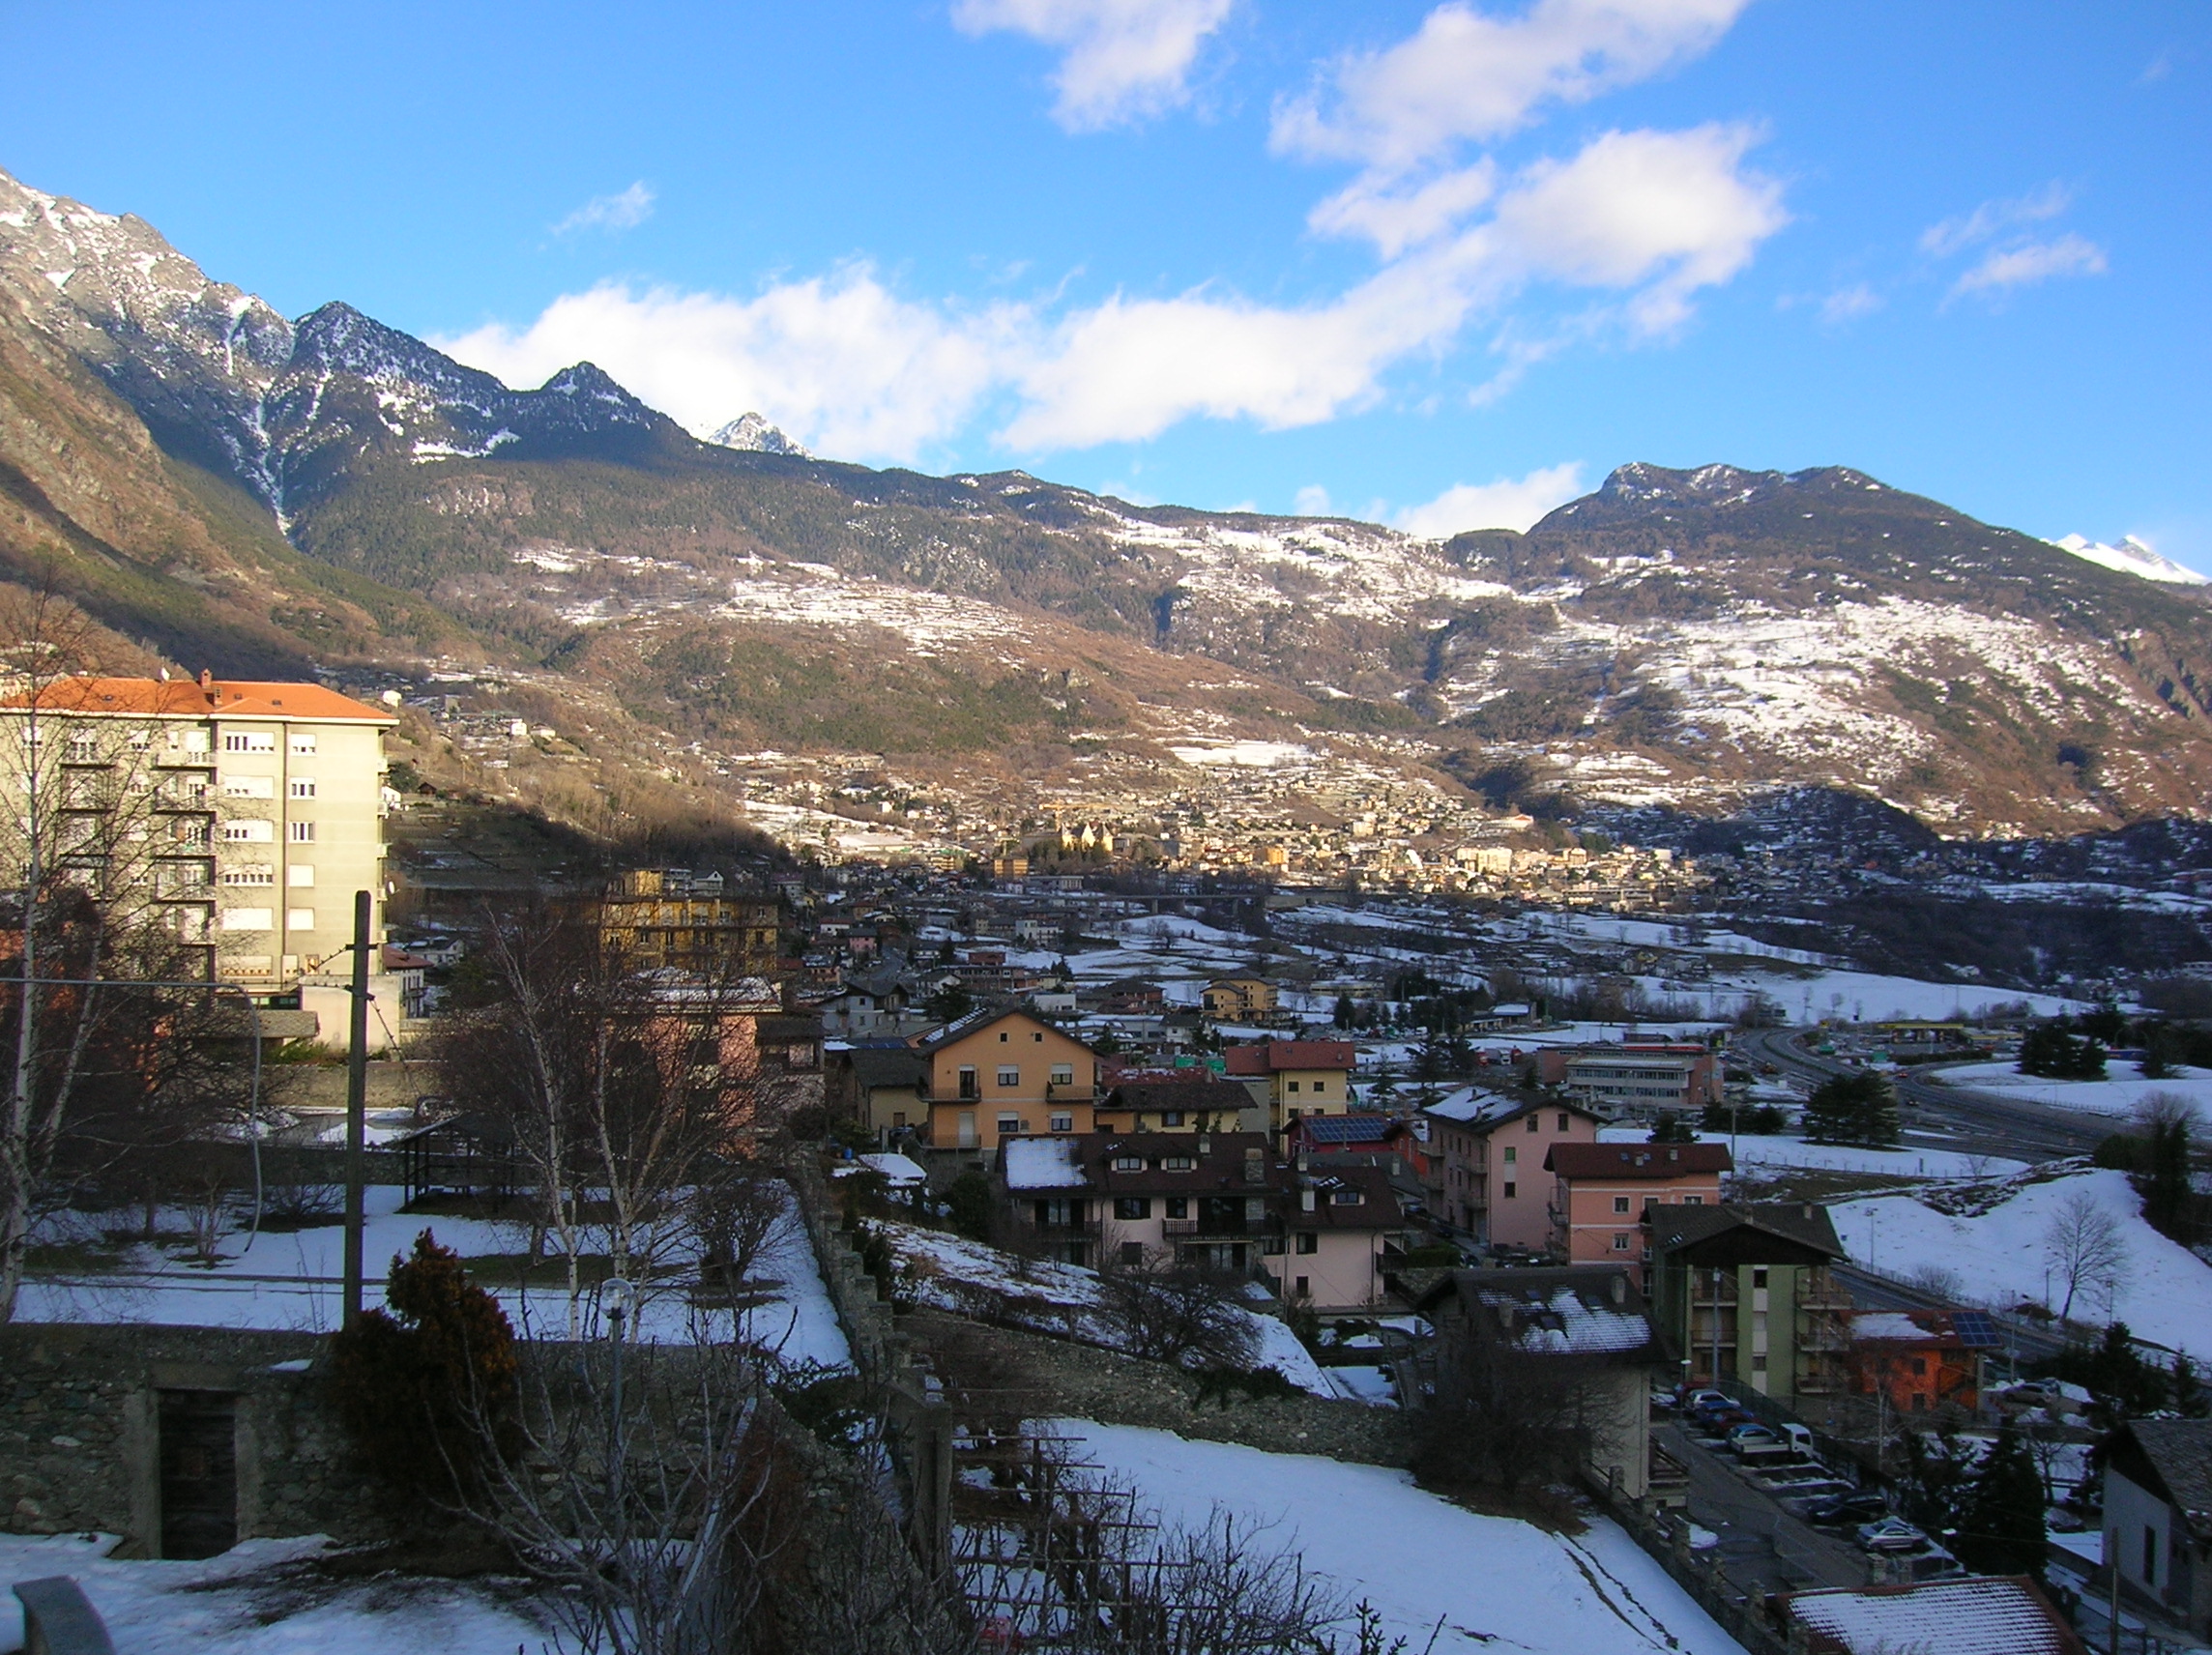 Chatillon in the Alps